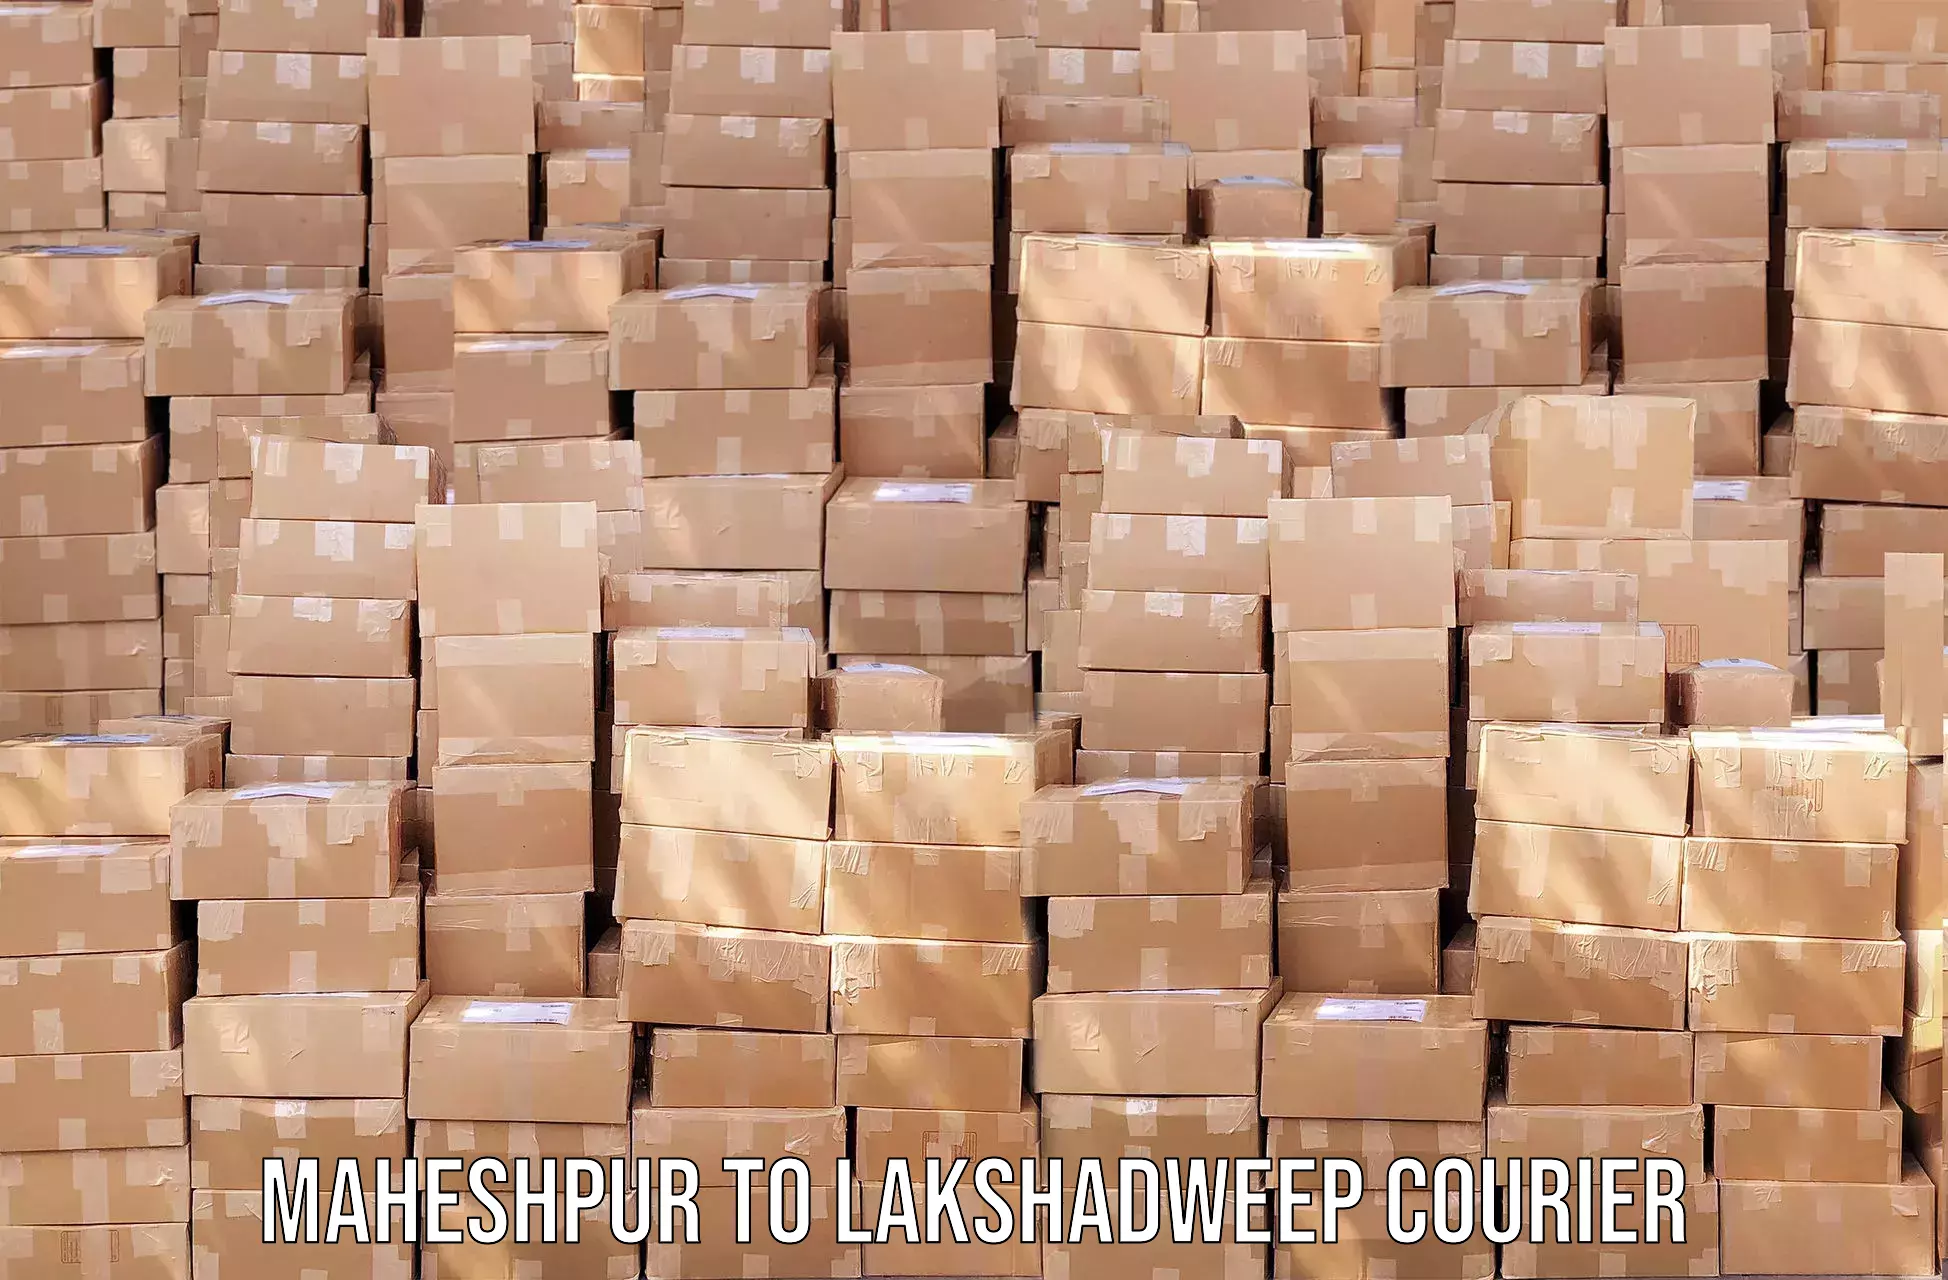 Same-day delivery solutions Maheshpur to Lakshadweep